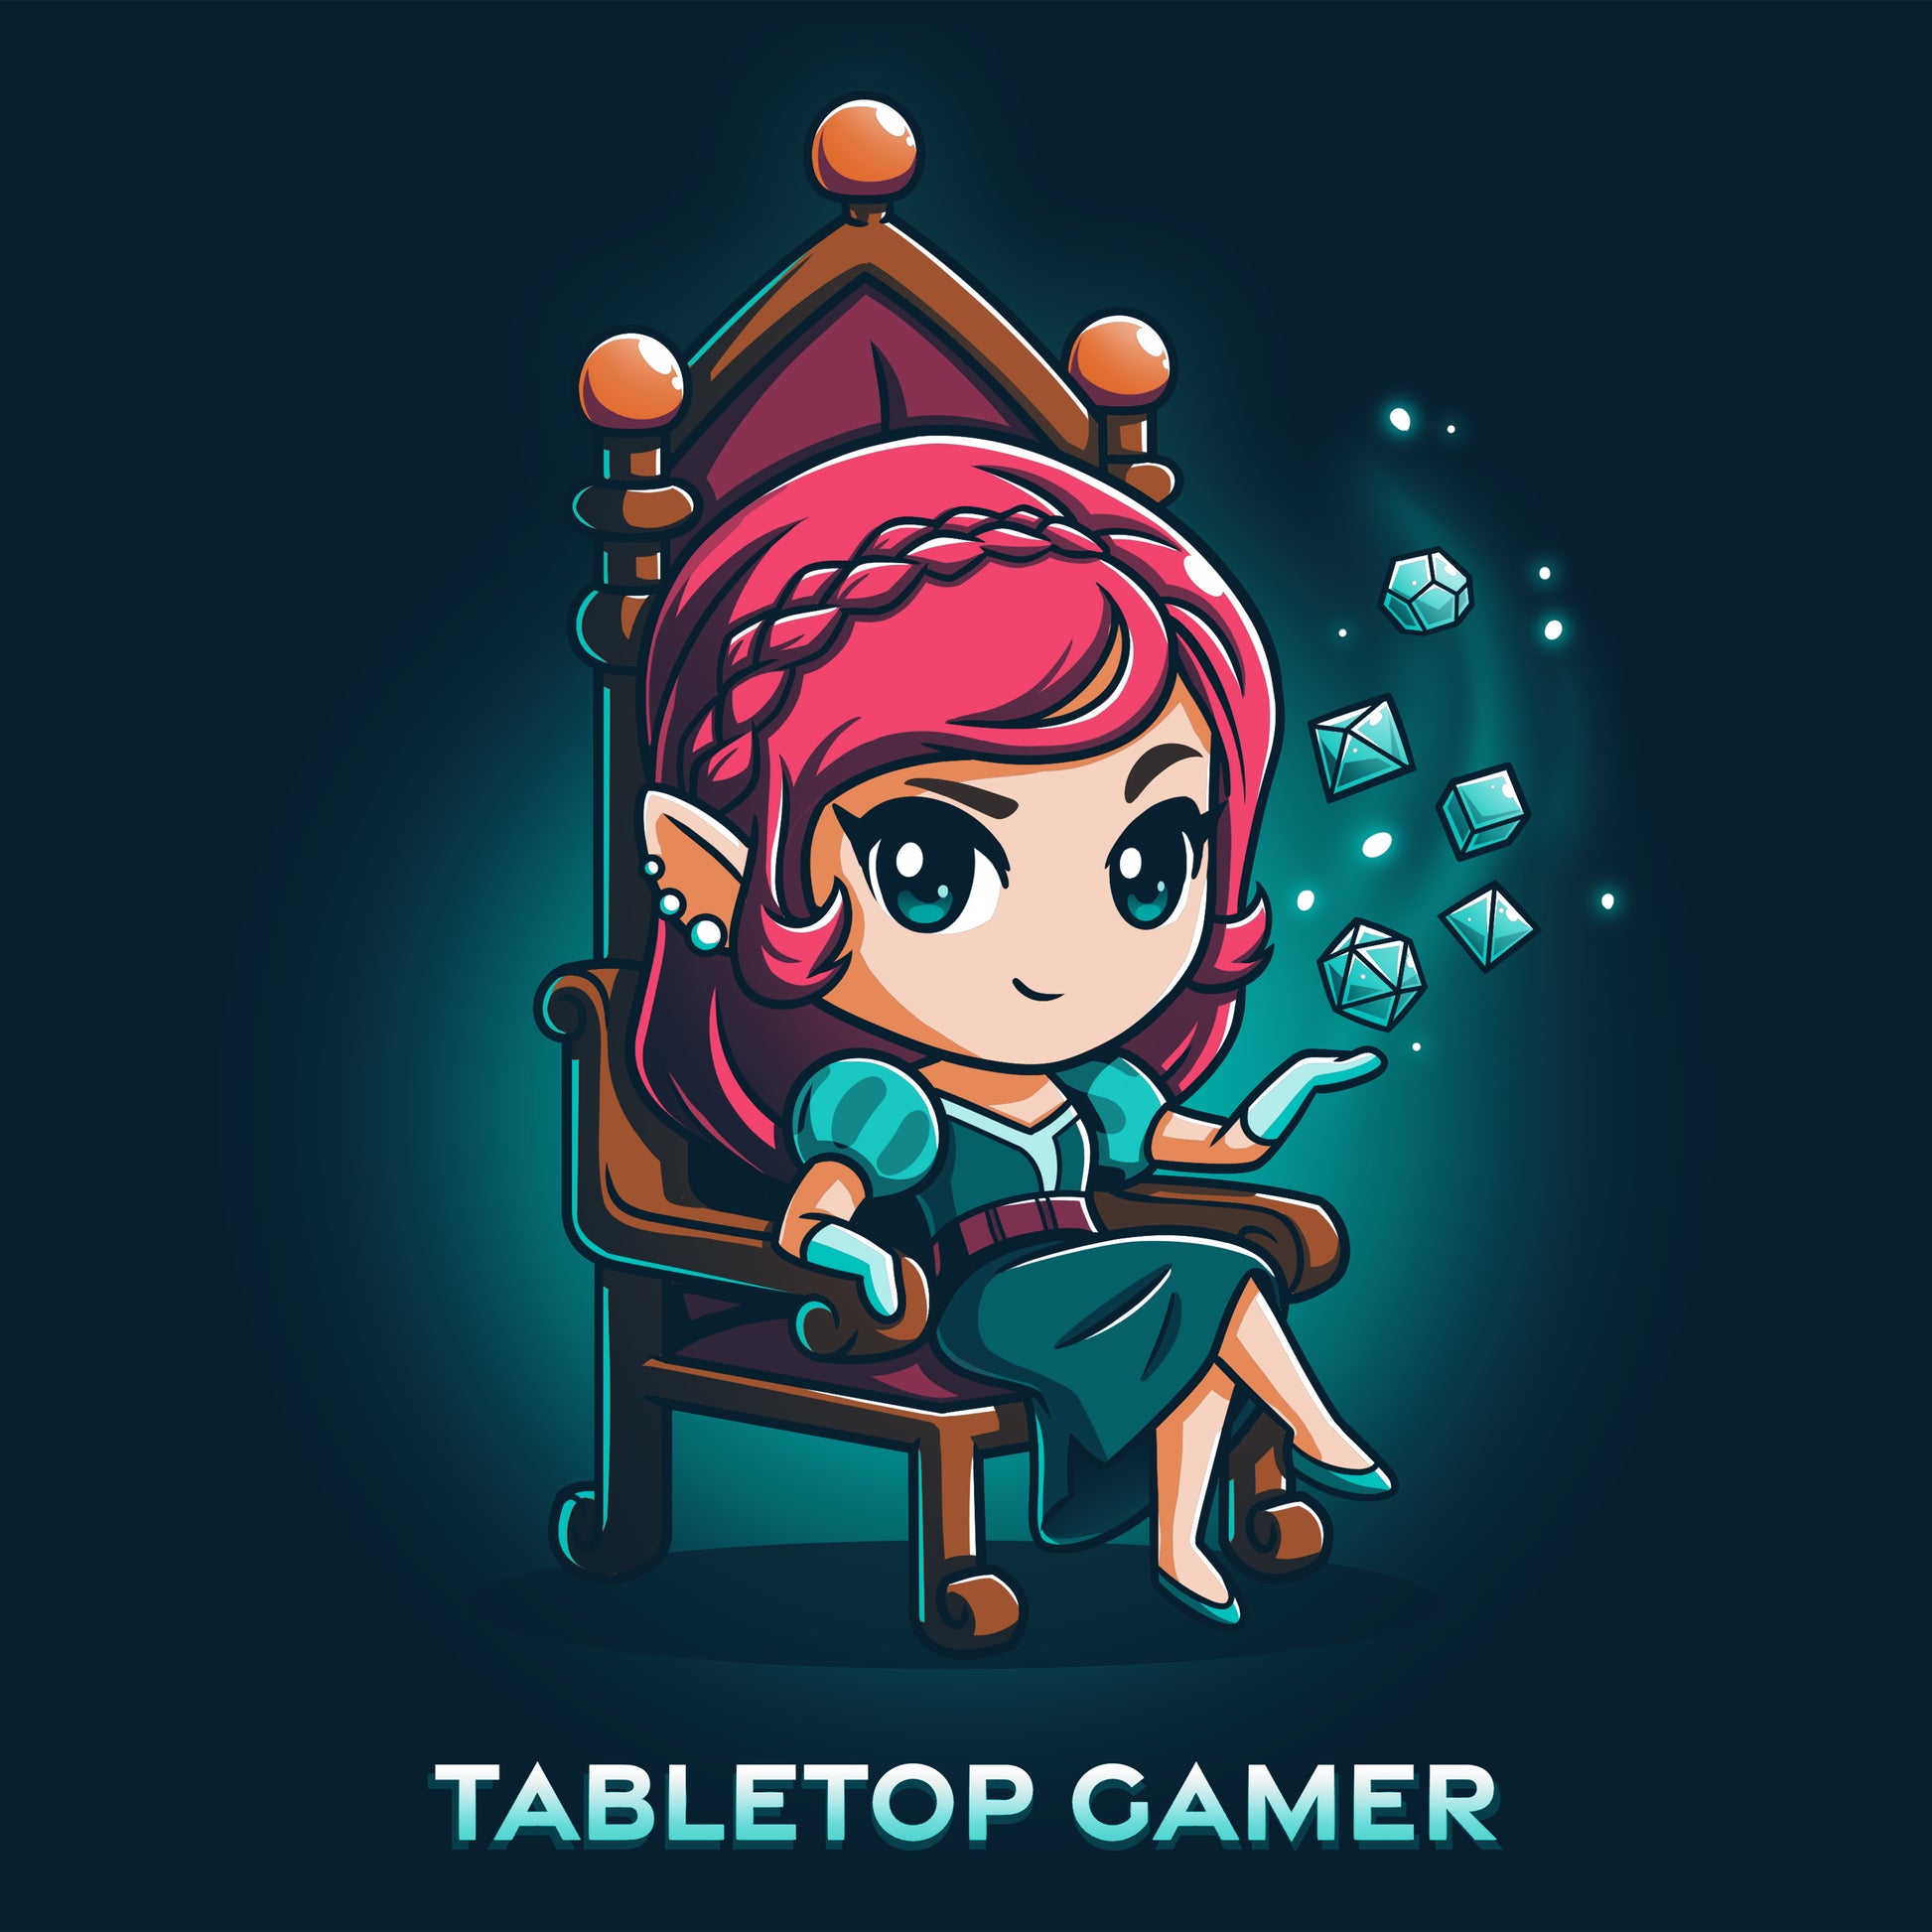 A girl sitting on a navy blue throne wearing a TeeTurtle Tabletop Gamer t-shirt.